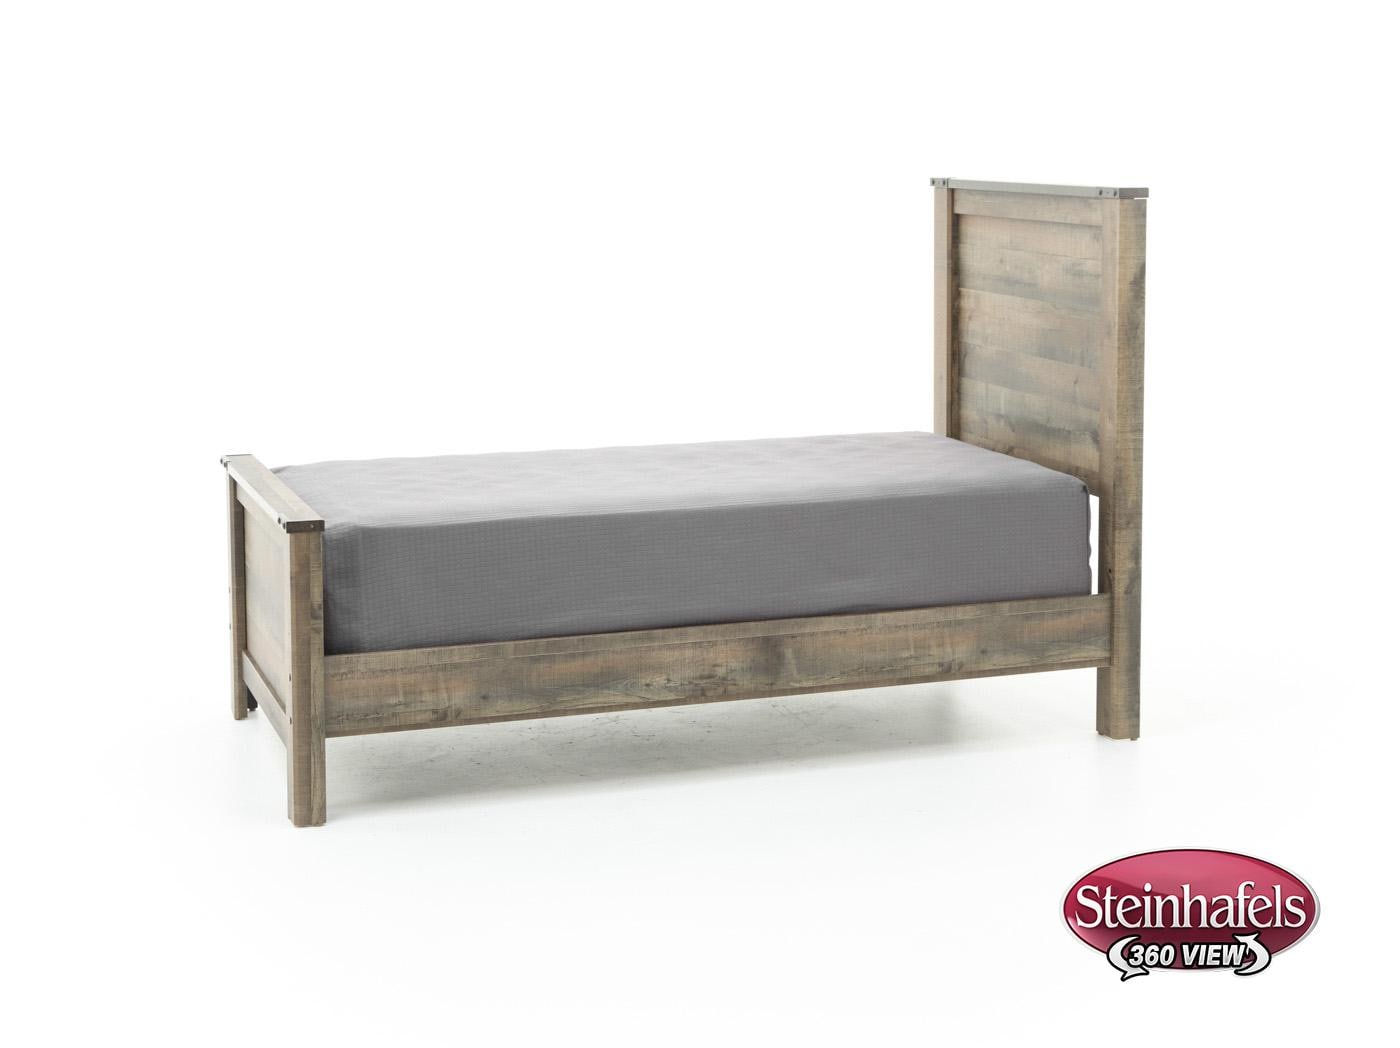 ashy brown twin bed package  image tpb  